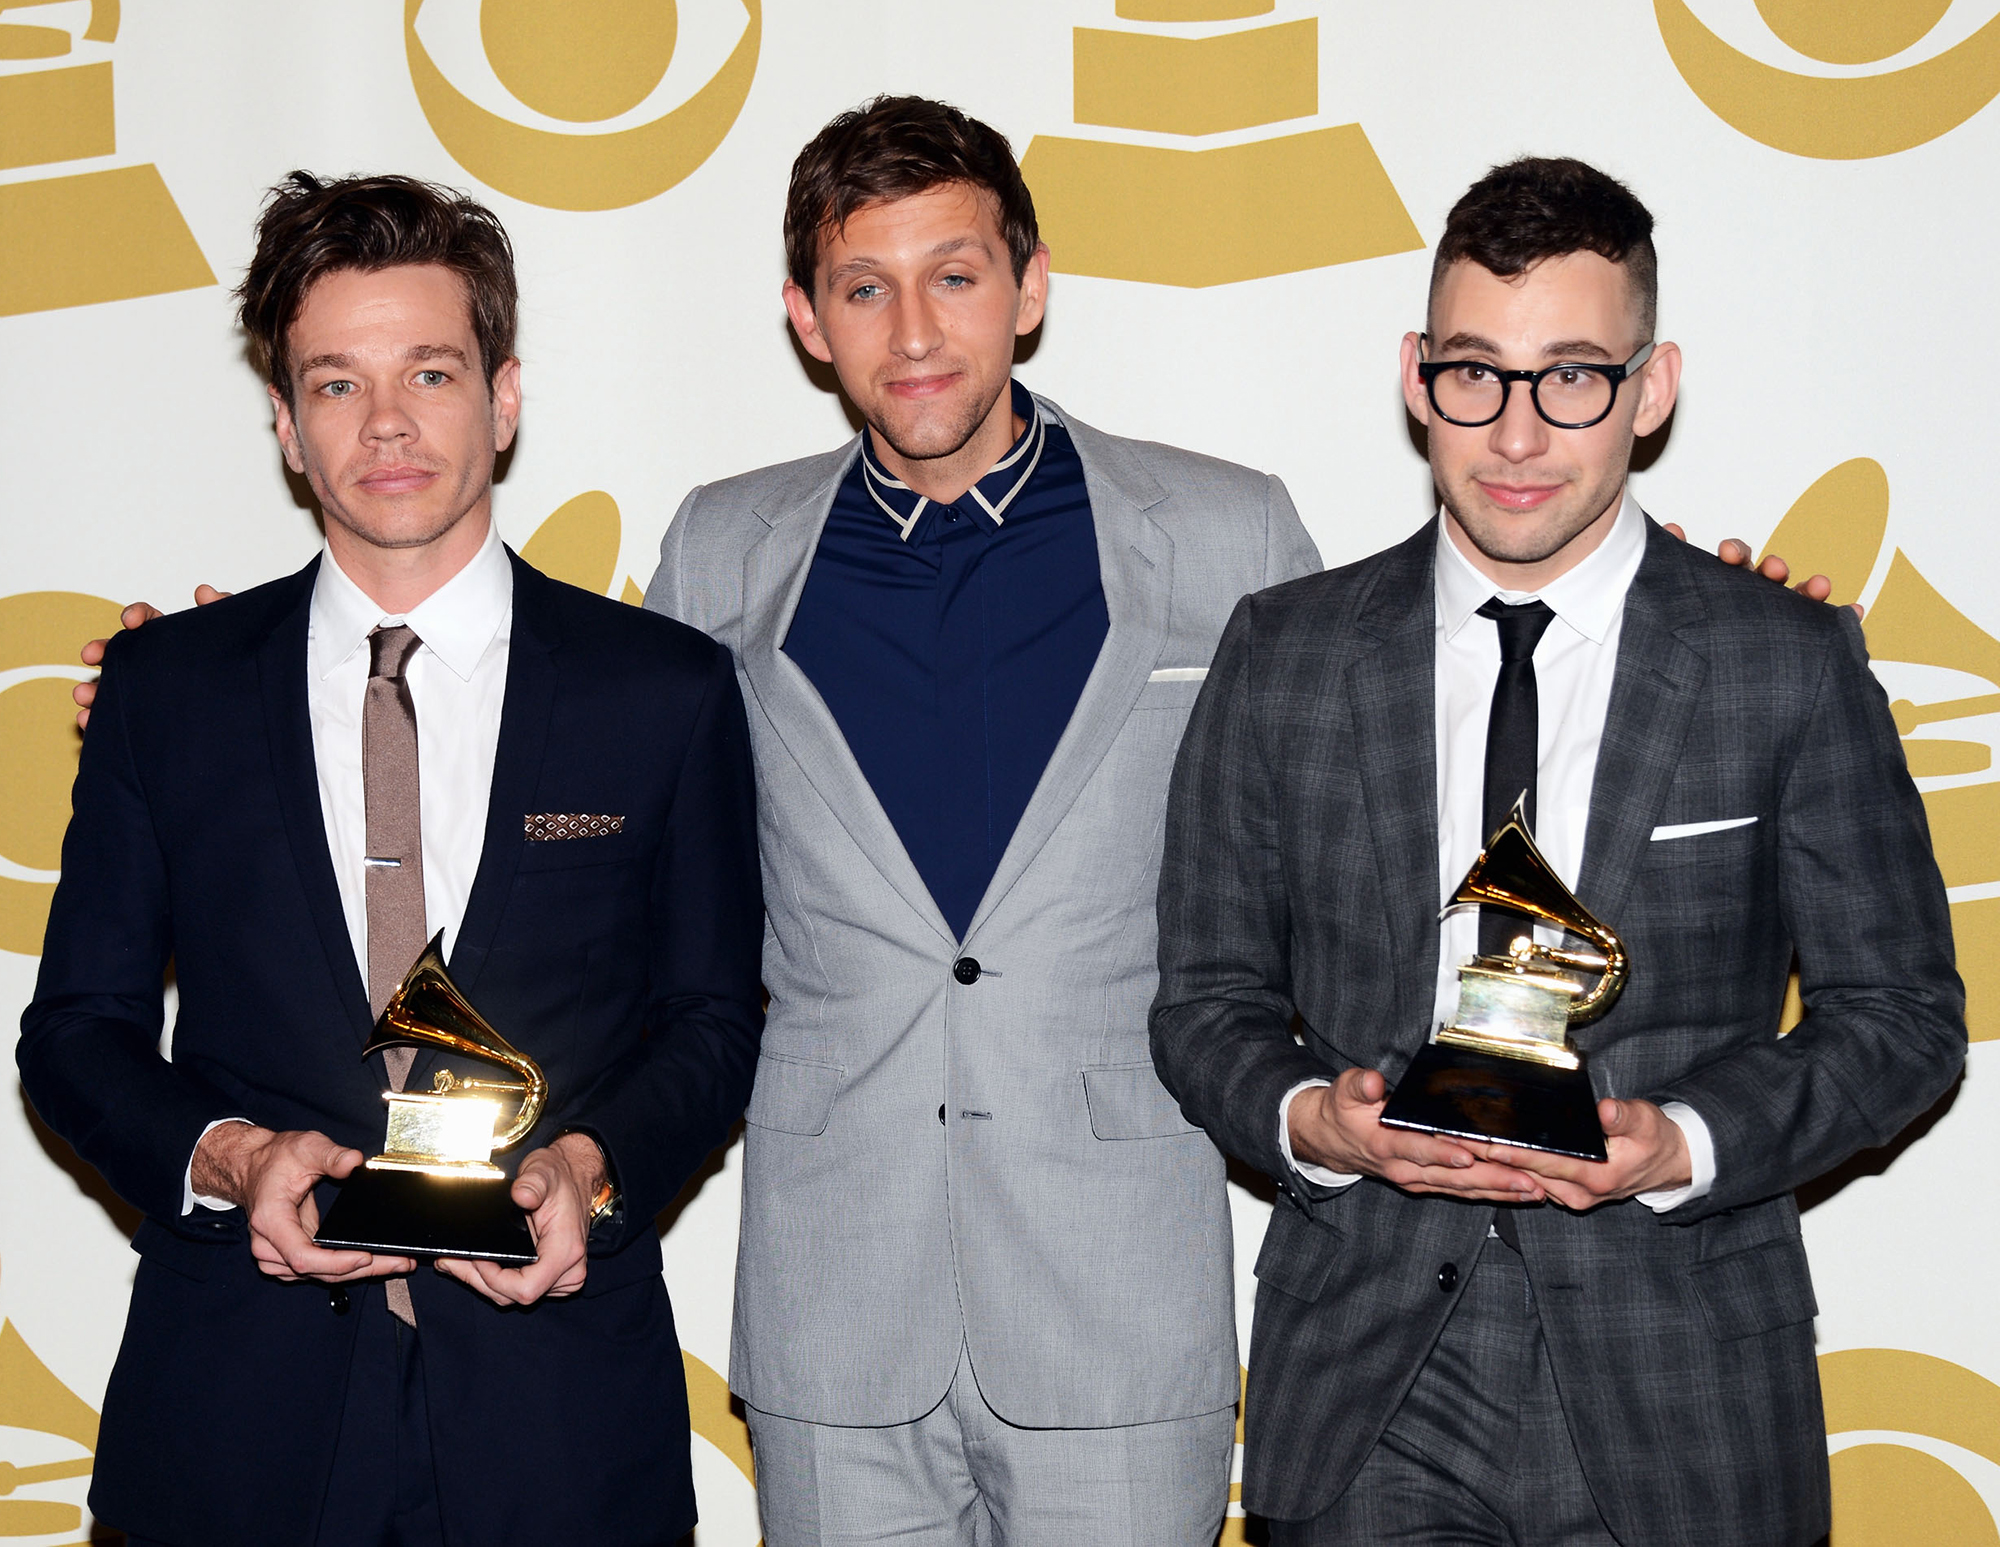 Best New Artist Grammy Winners Where Are They Now?